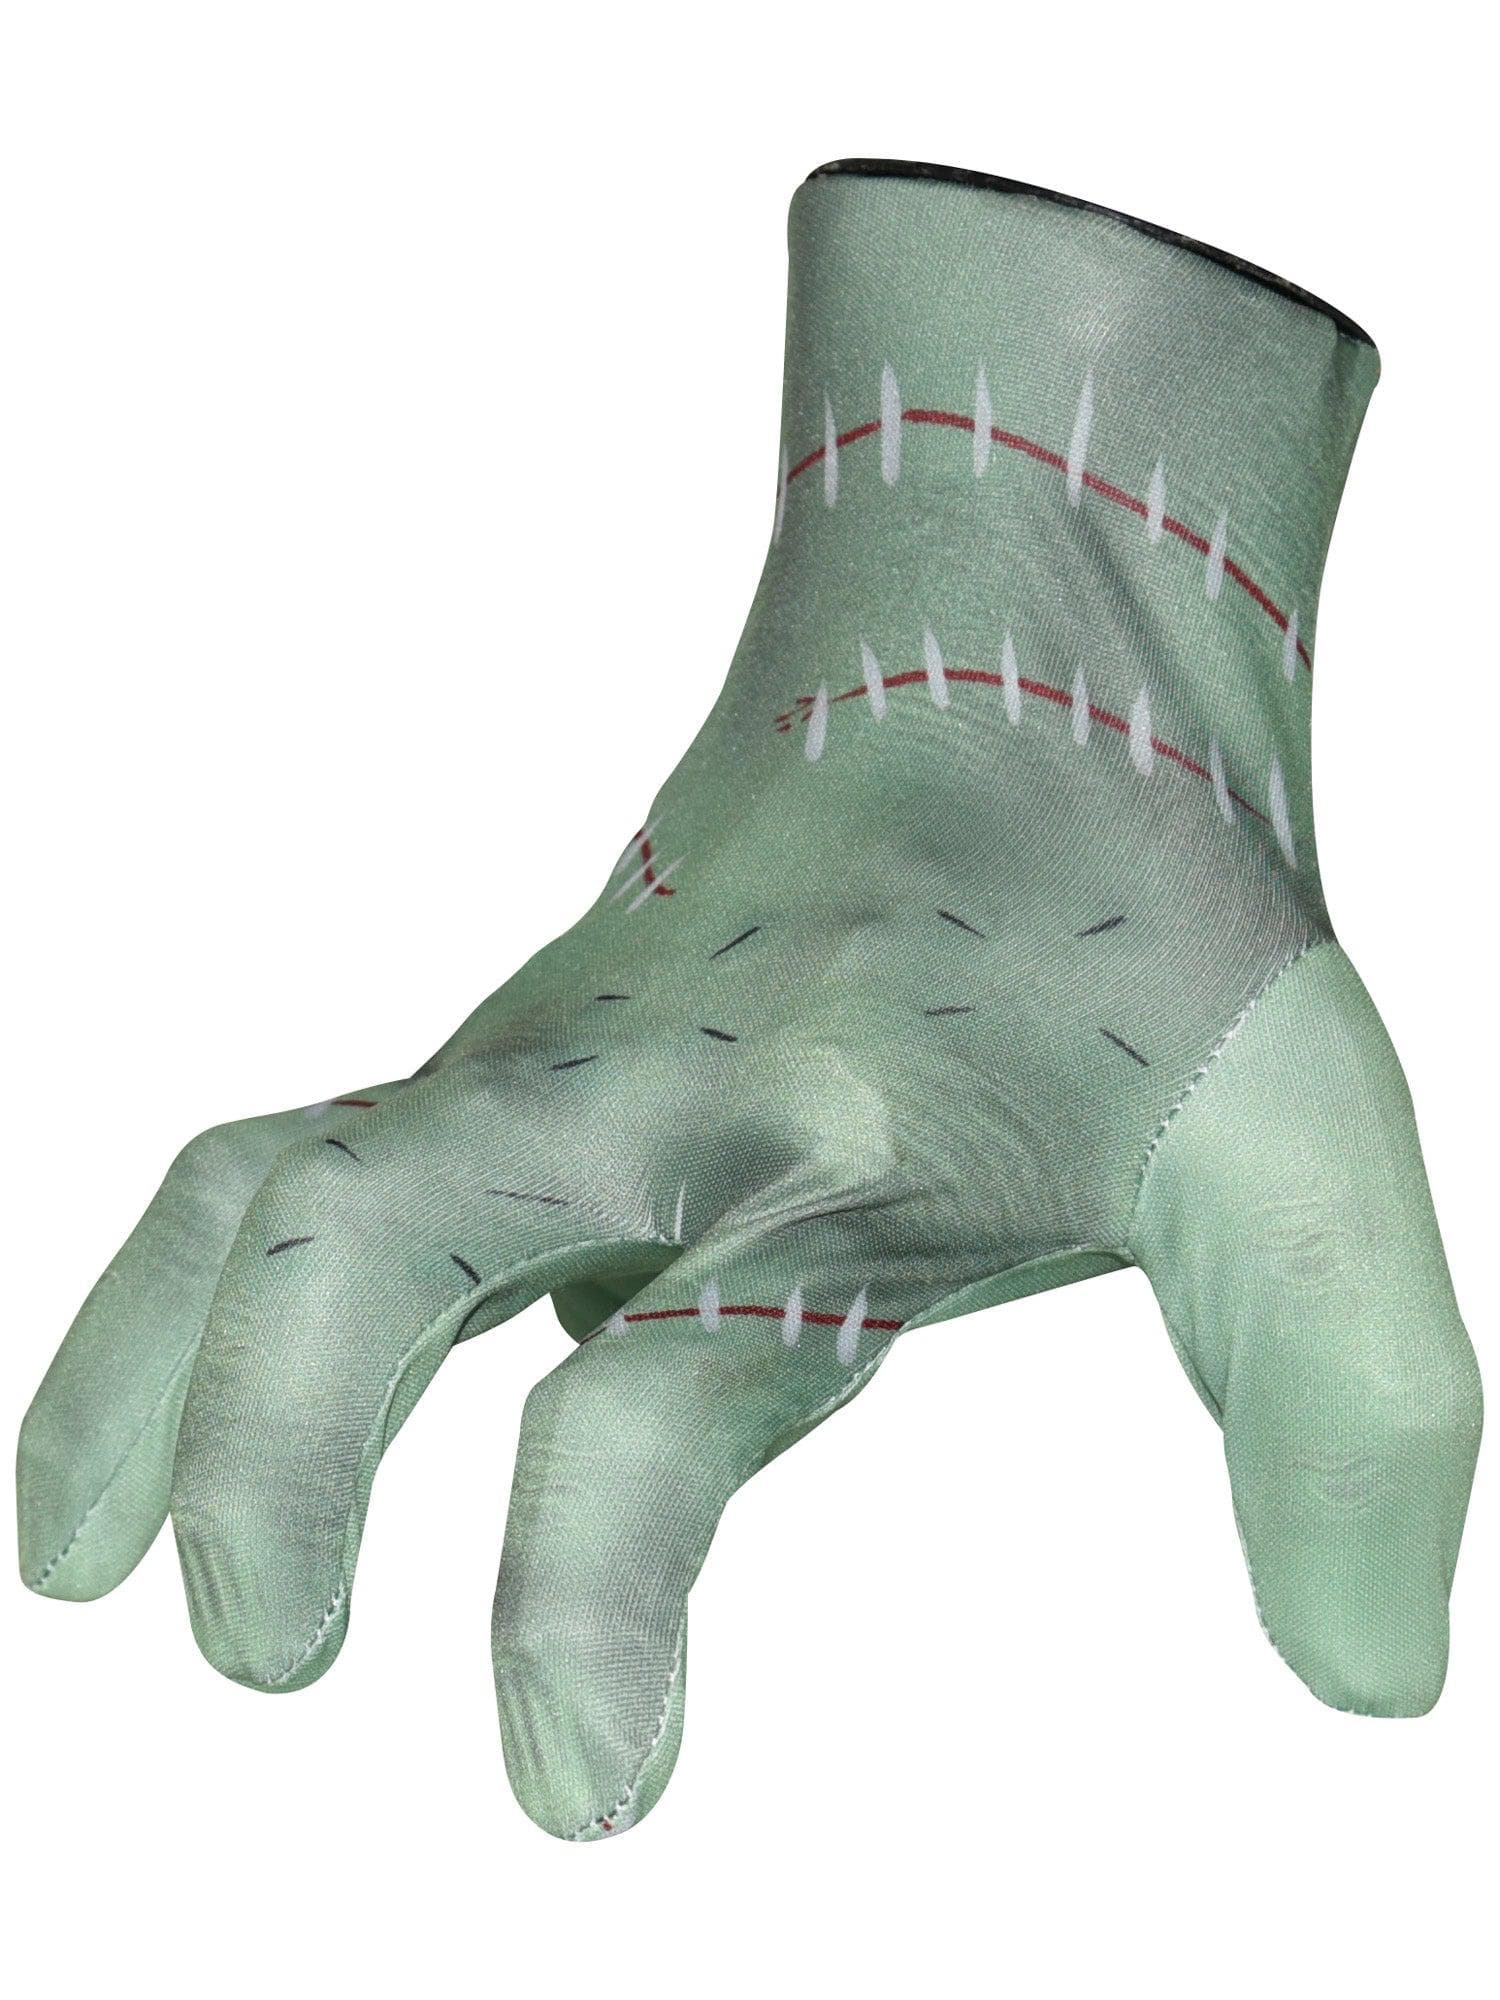 7.5 Inch Crawling Monster Hand Animated Prop - costumes.com